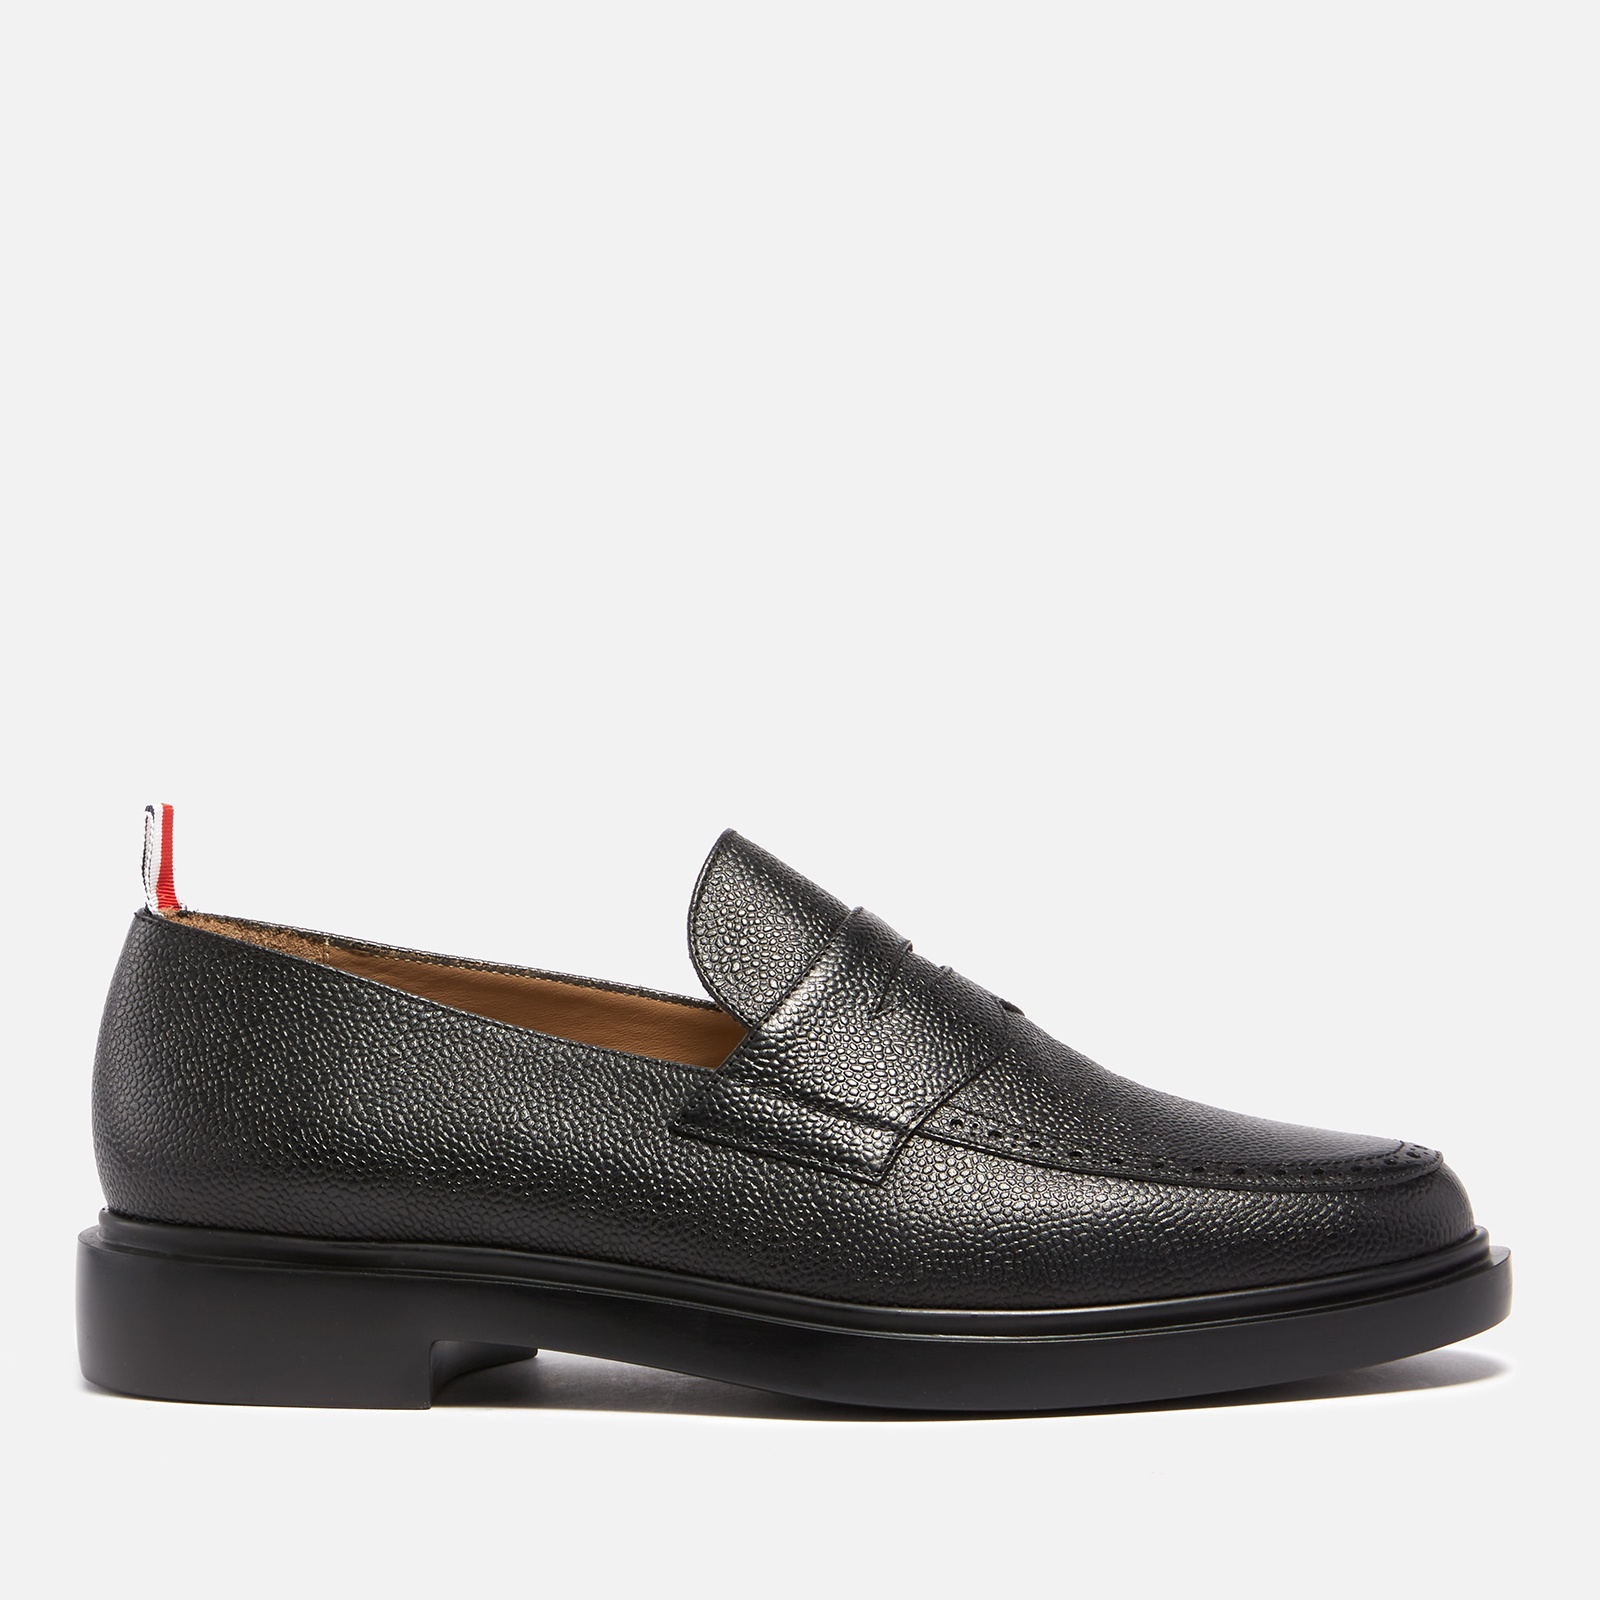 Thom Browne Men's Penny Loafers - Black - 1